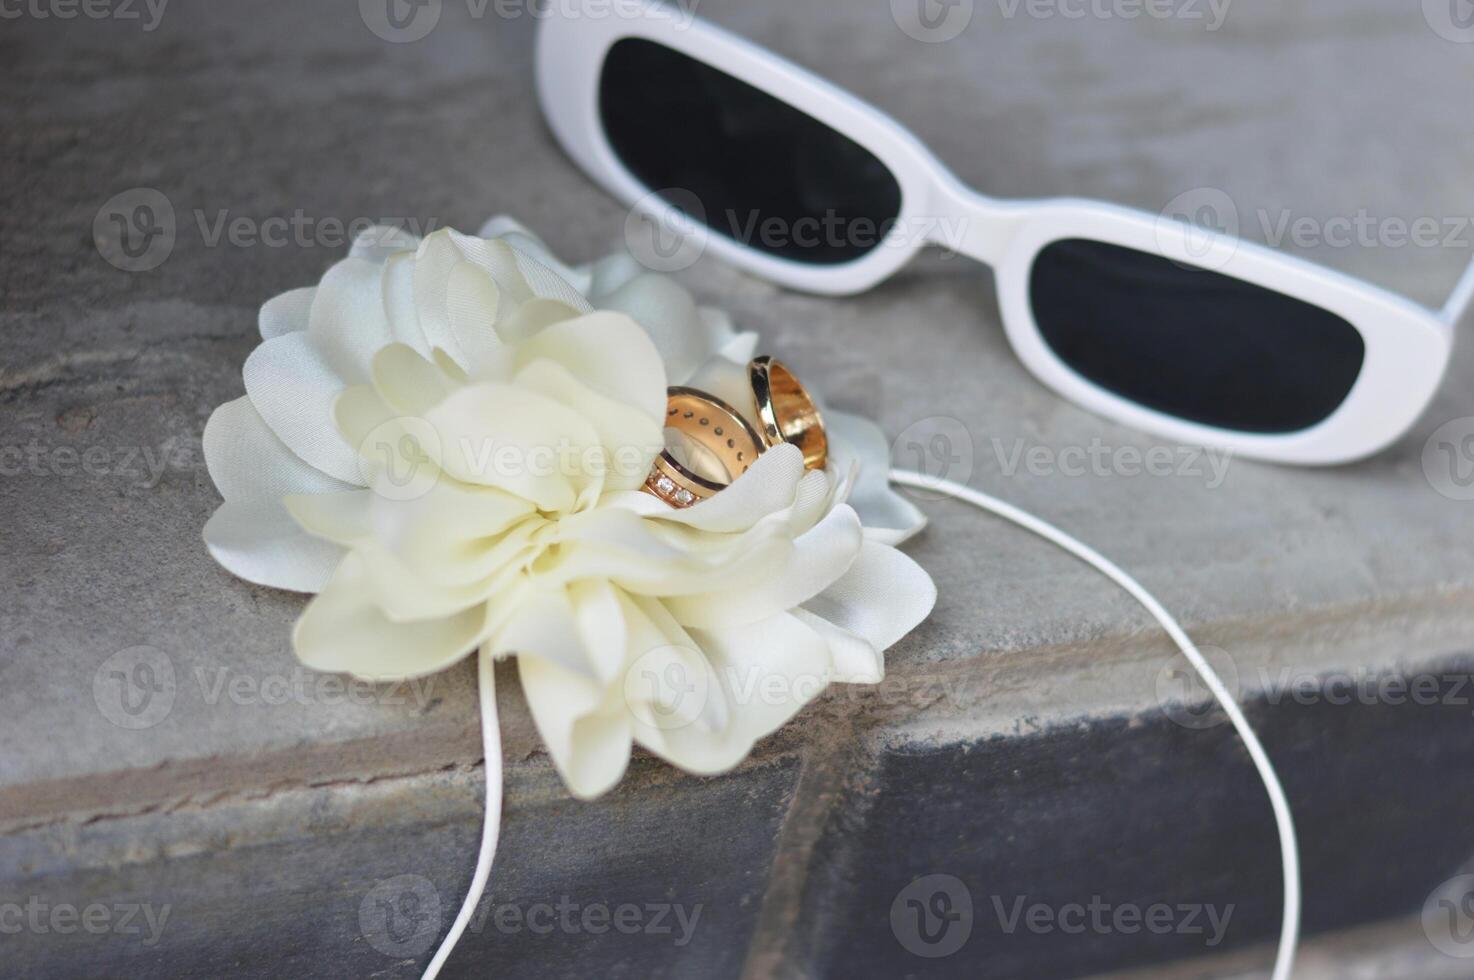 Sunglasses, white boutanier flower and newlyweds rings on a gray concrete surface. Wedding accessories. photo